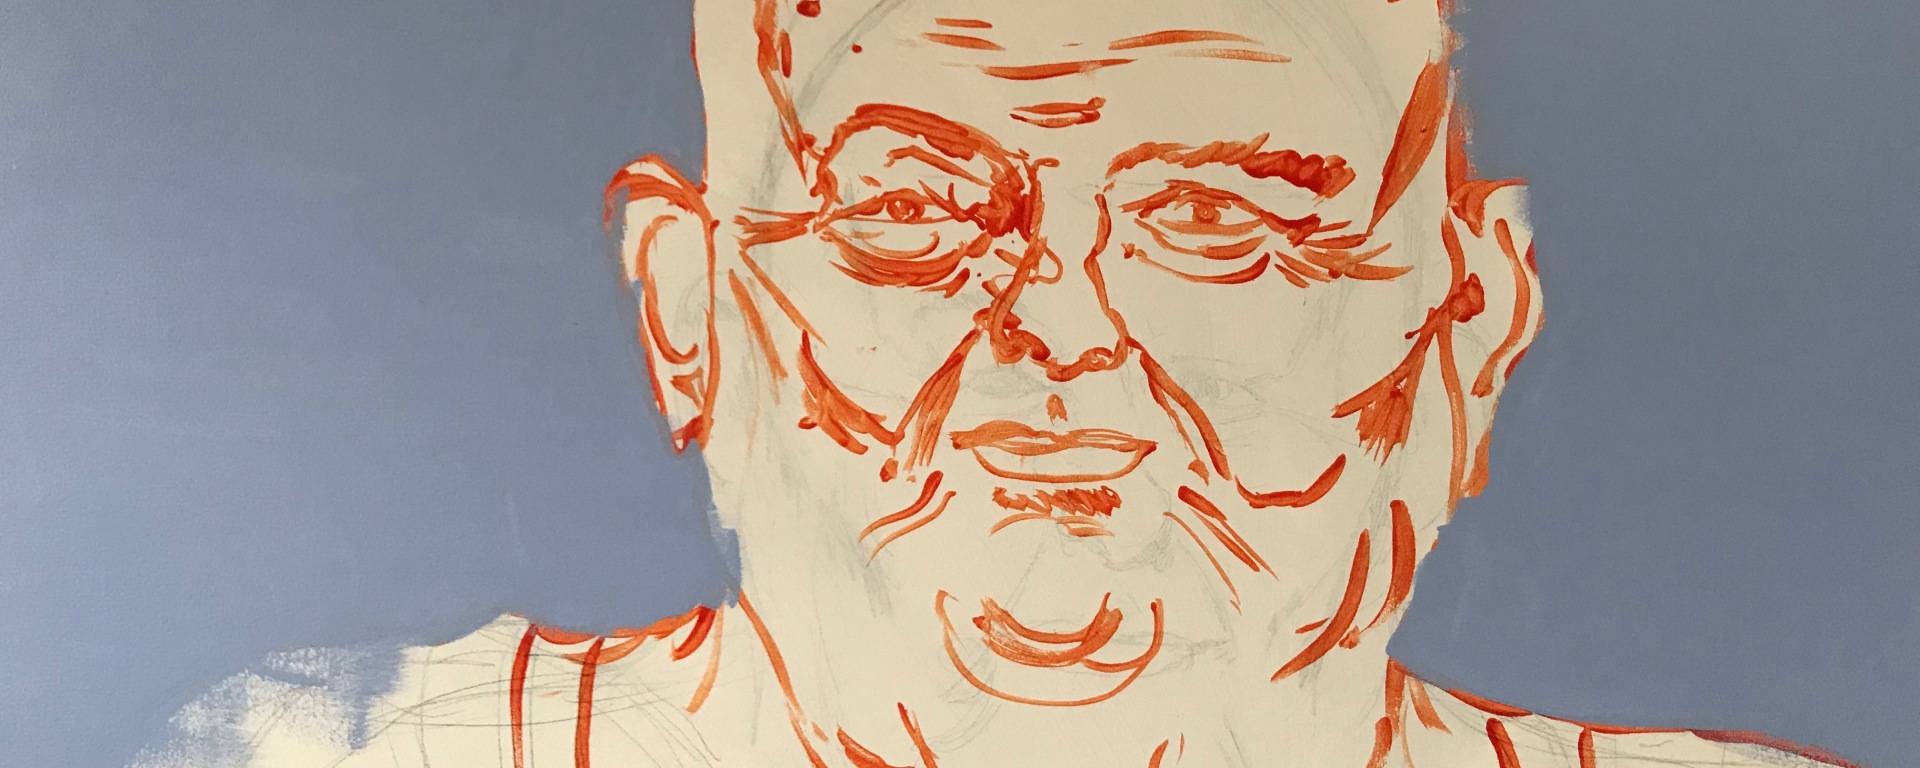 close up sketch of Les Murray by Ray Monde